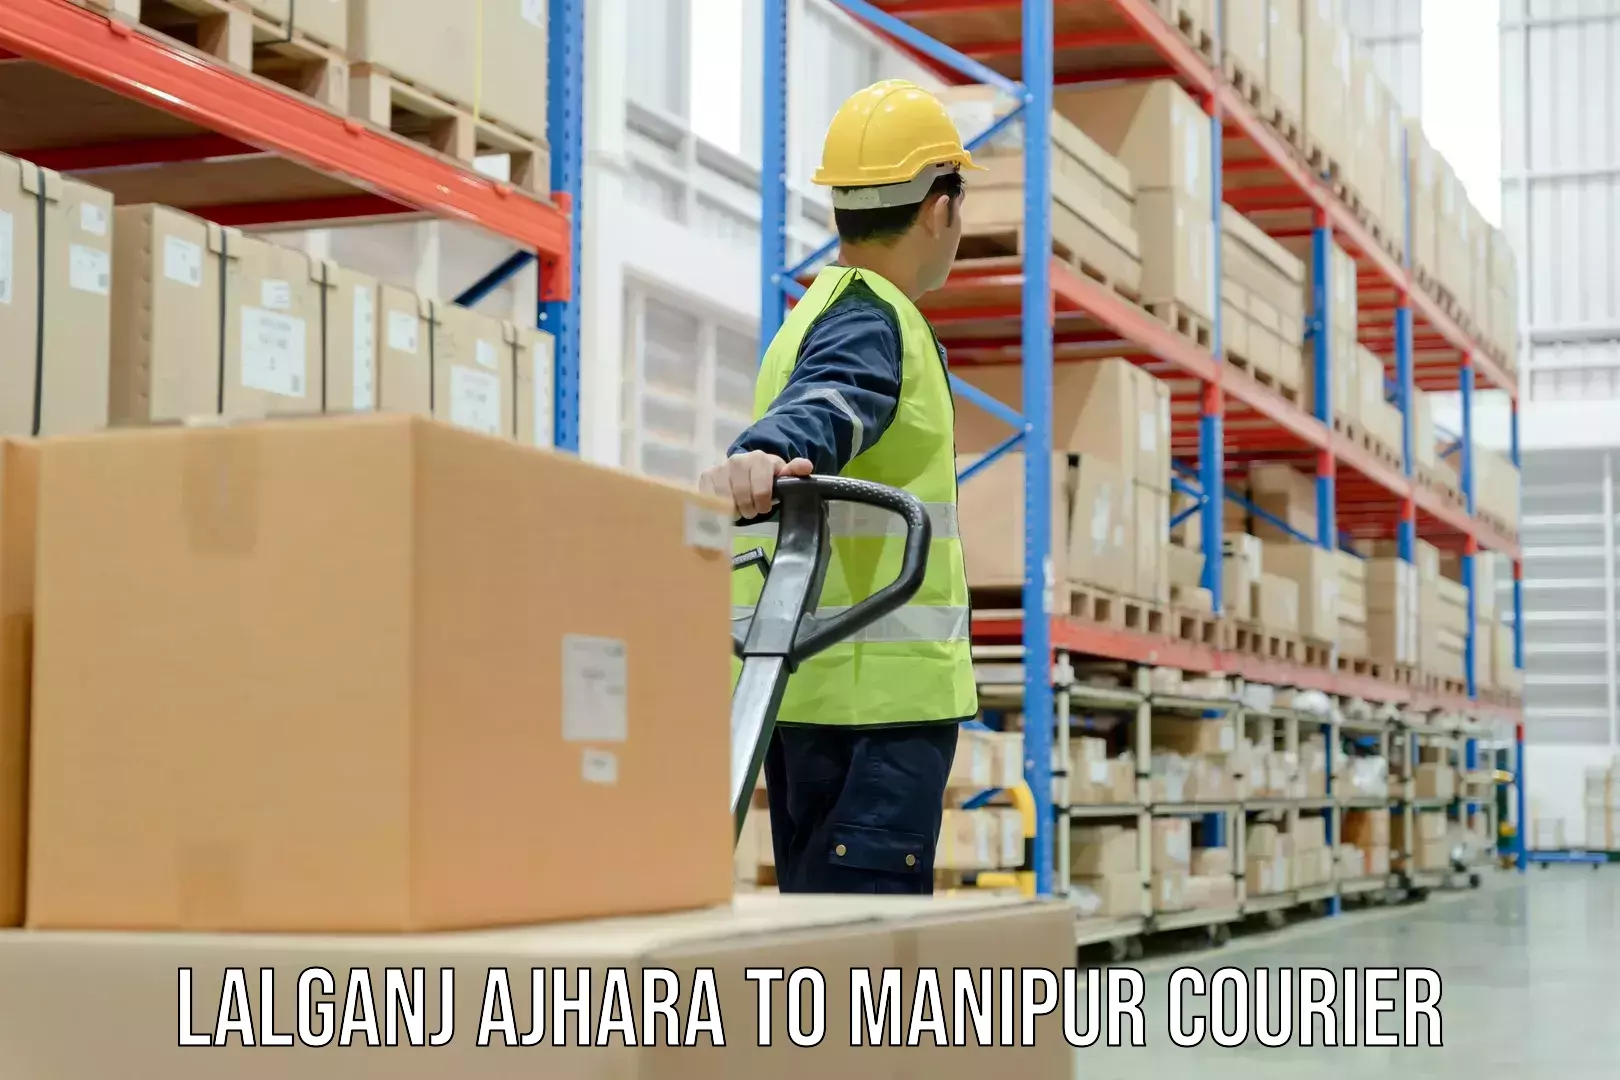 State-of-the-art courier technology Lalganj Ajhara to Manipur